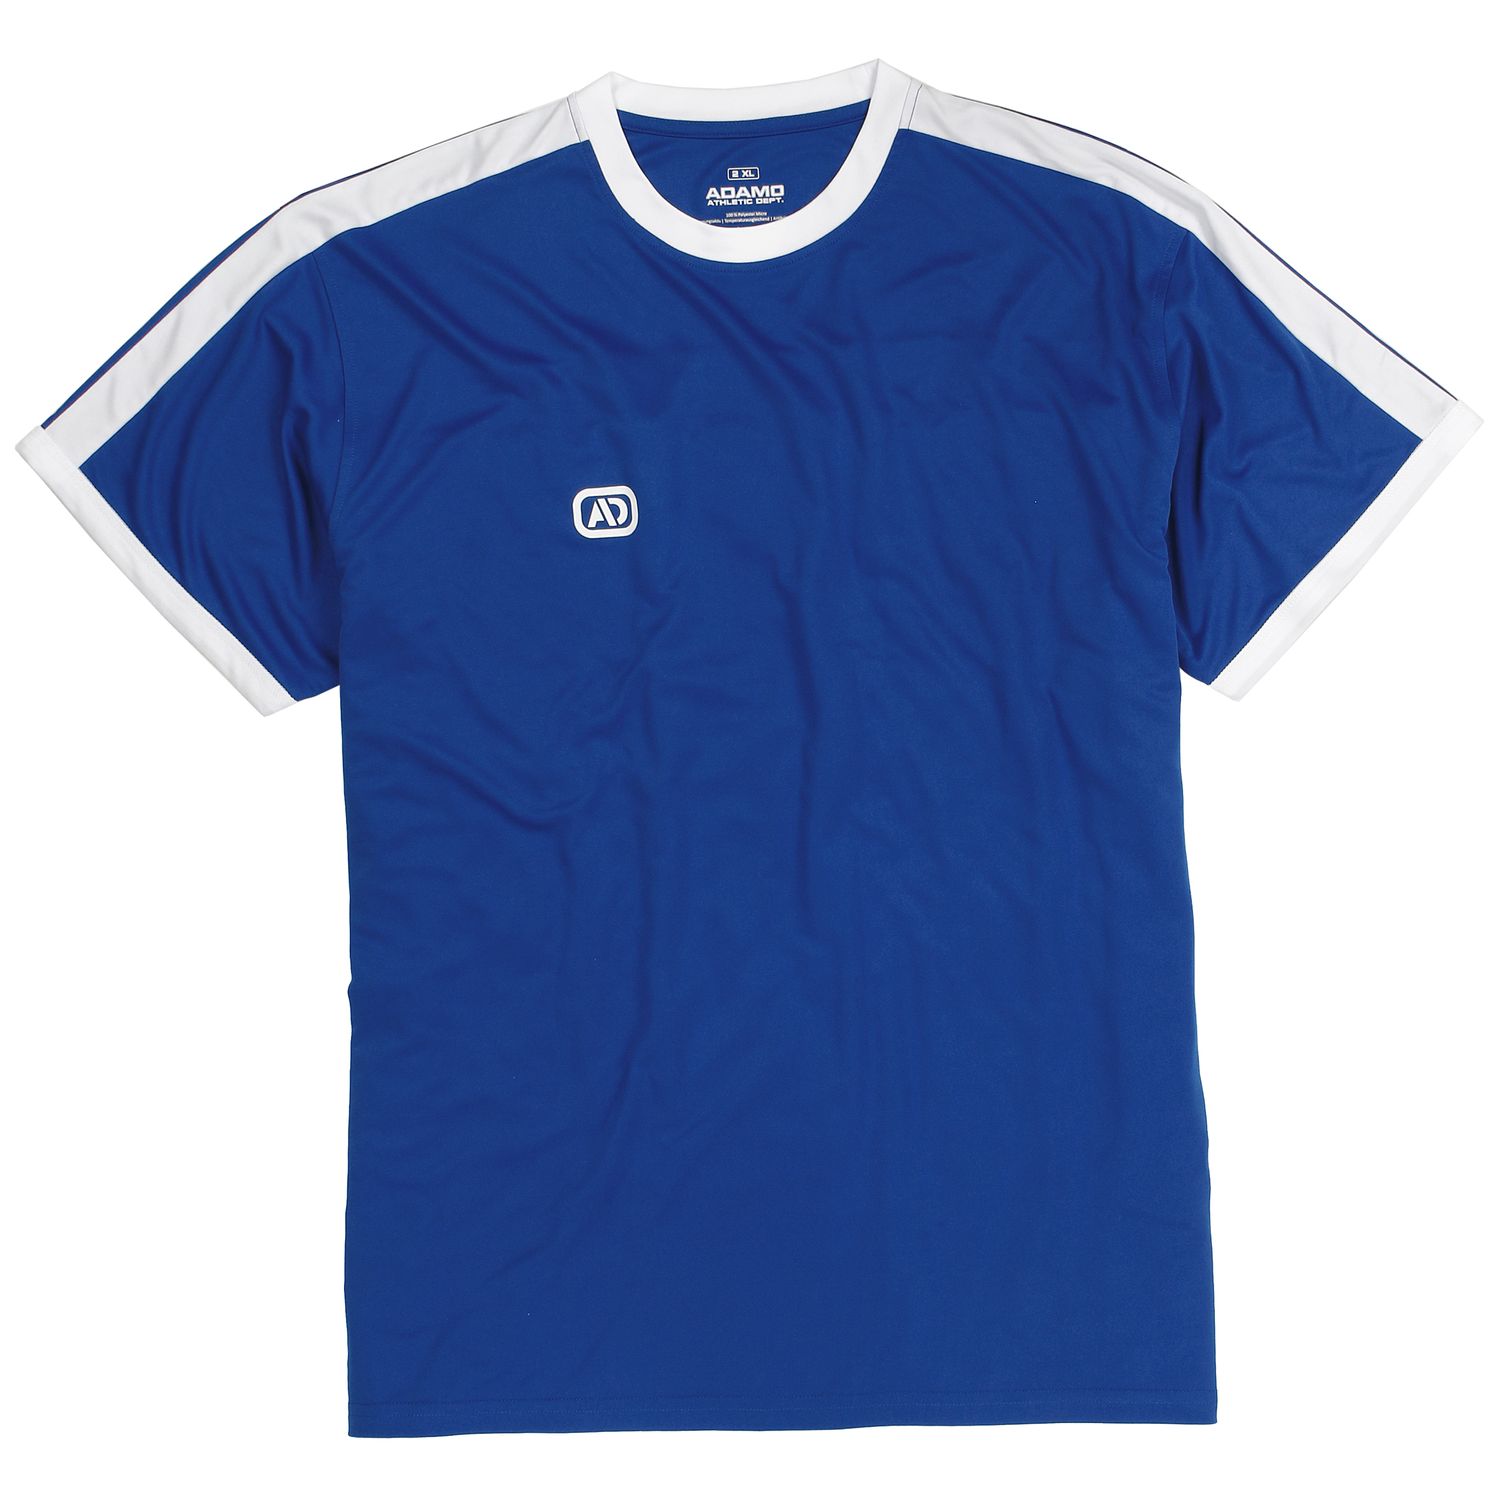 Royal blue functional shirt for men by Adamo series "Marco" COMFORT FIT in oversizes up to 12XL